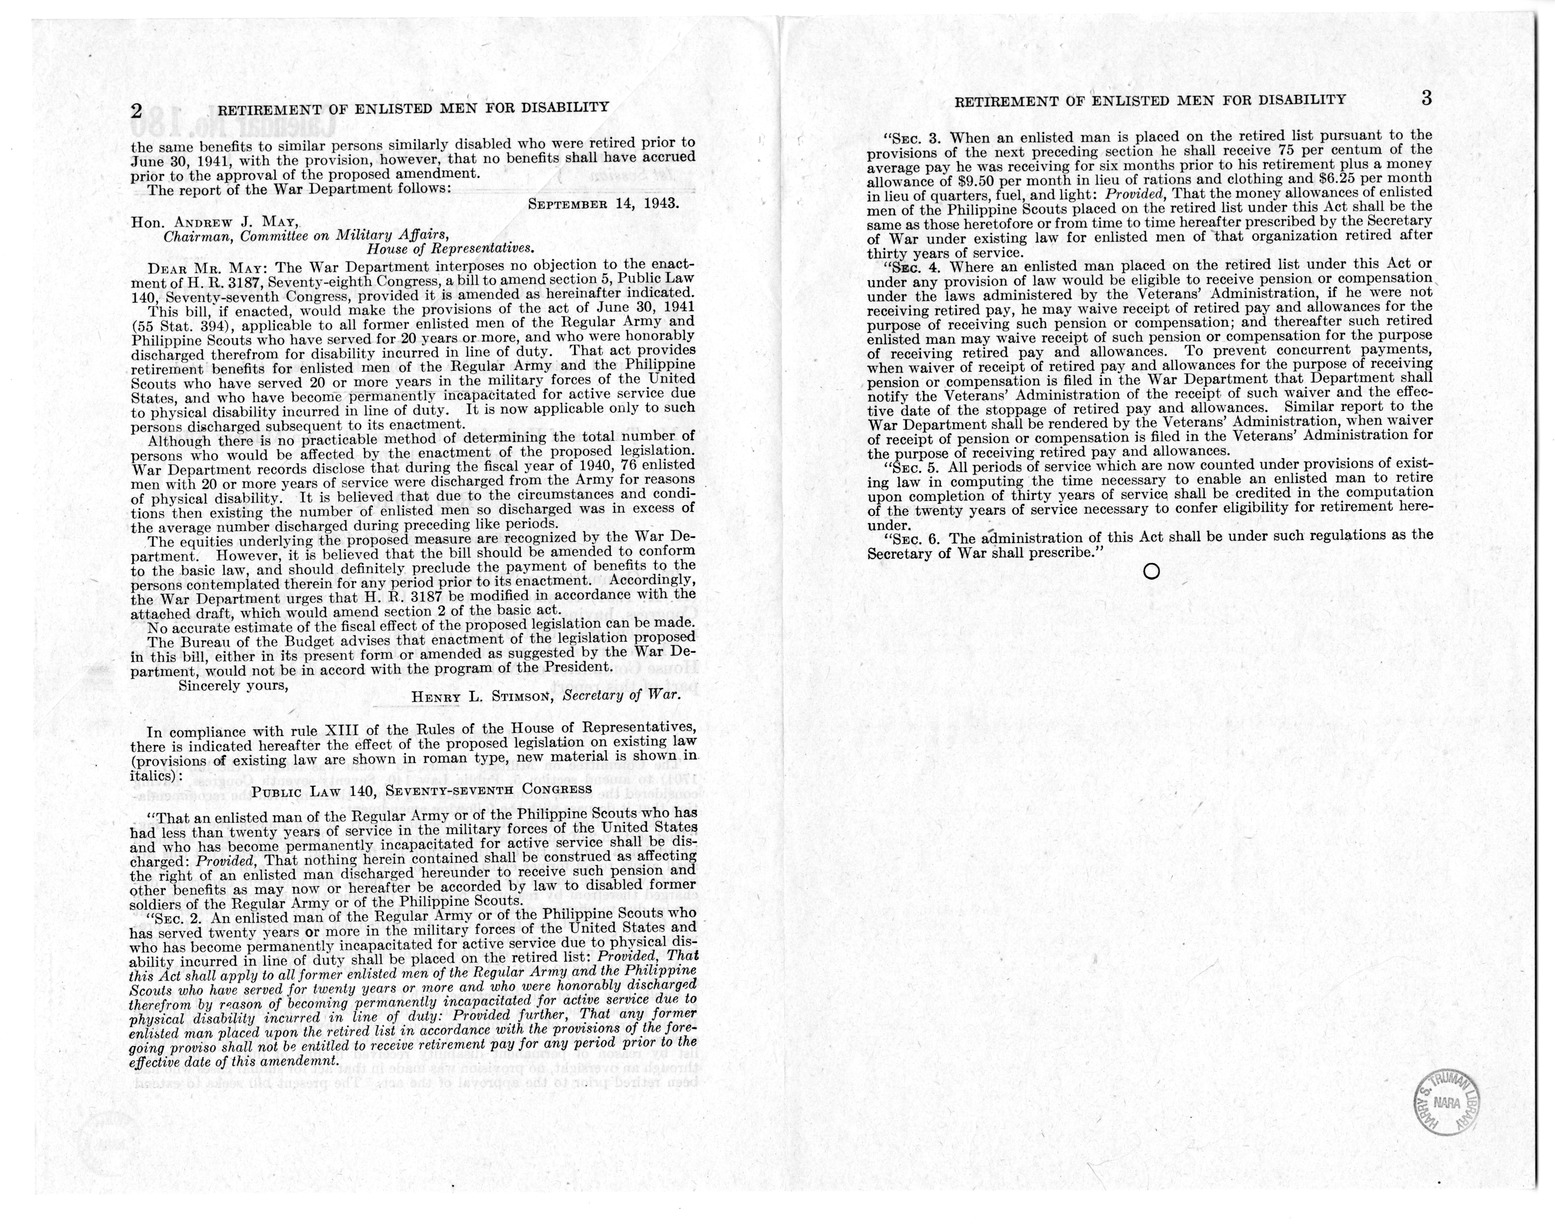 Memorandum from Harold D. Smith to M. C. Latta, H.R. 1701, To Amend Section 2, Public Law 140, Seventy-Seventh Congress, with Attachments